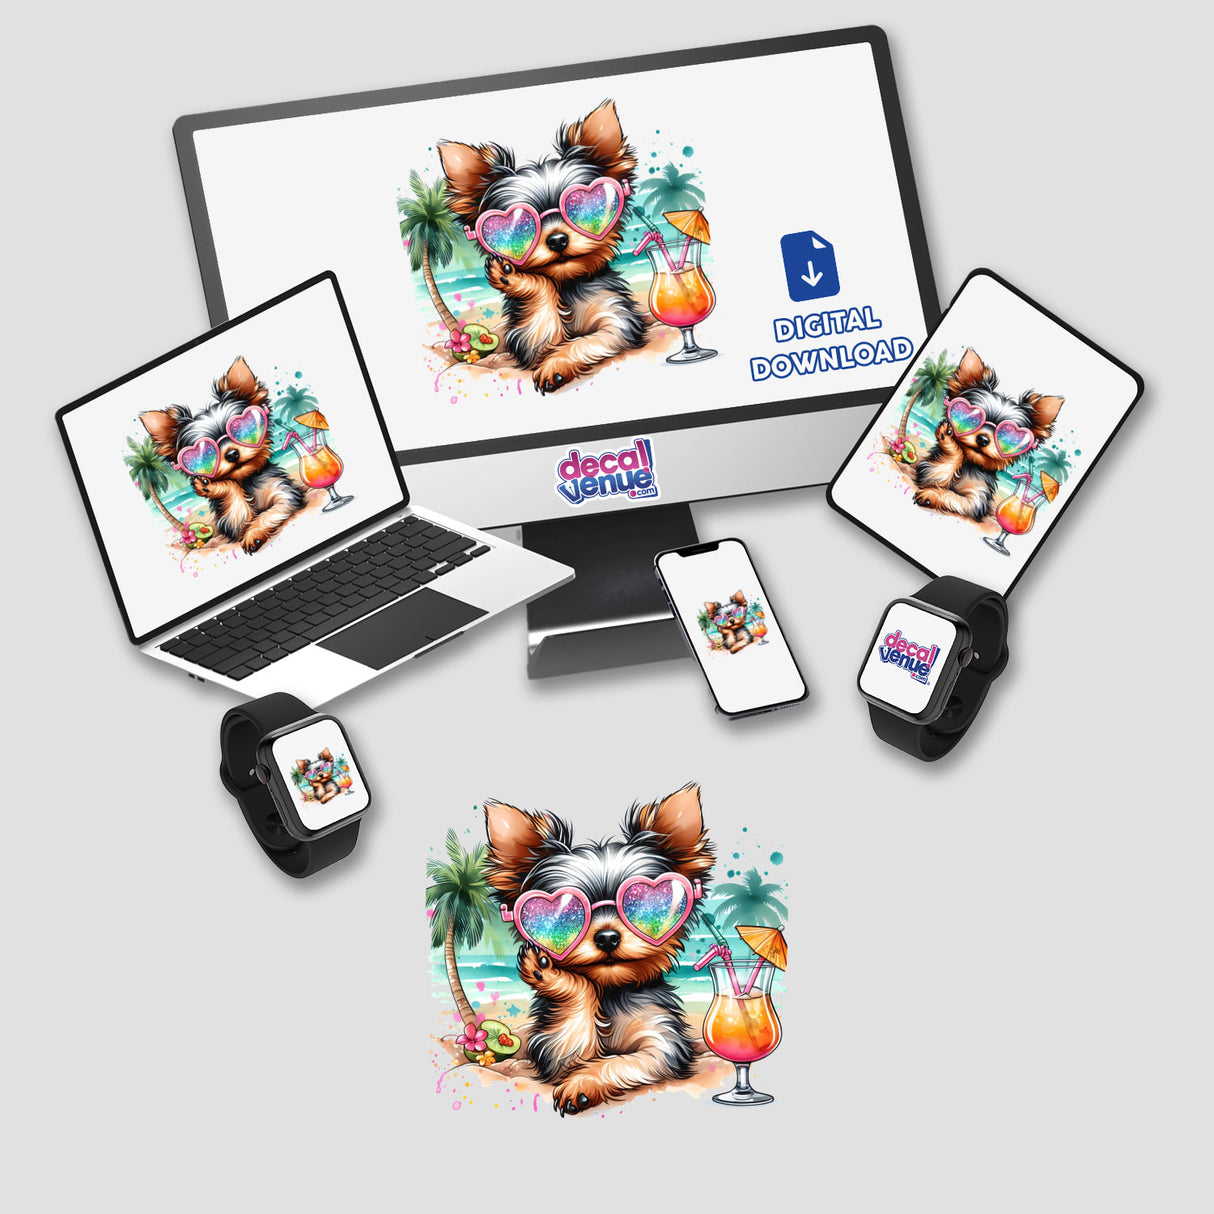 Cute Yorkshire terrier dog wearing sunglasses, surrounded by tropical elements including palm trees, cocktail, and colorful artwork on various digital devices from Decal Venue store.